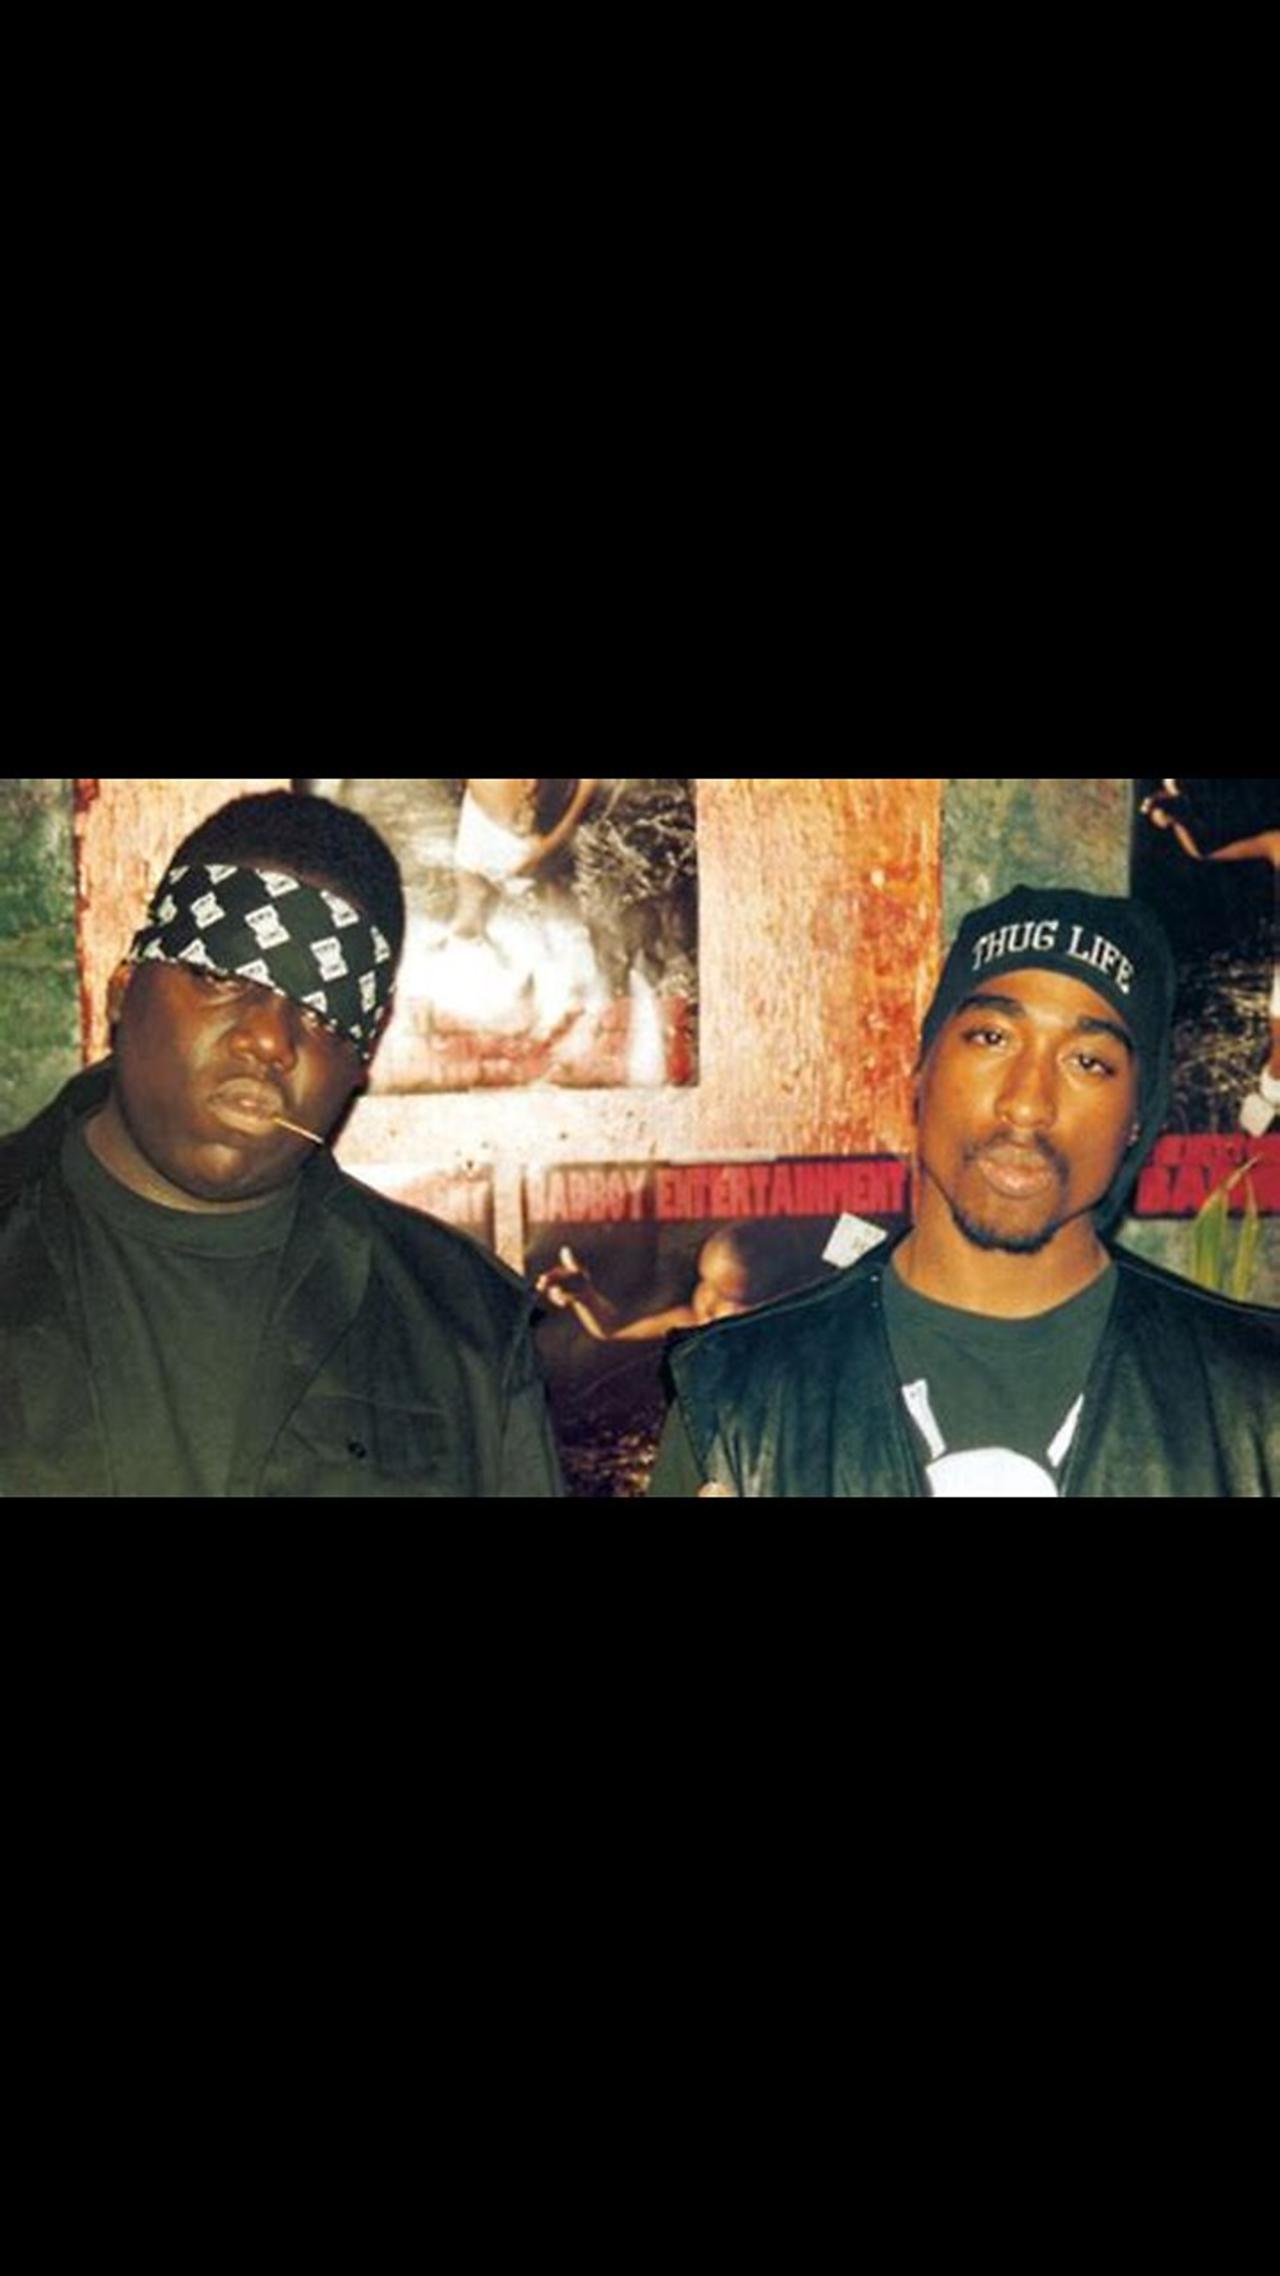 AI Tupac Shakur Covers Notorious B.I.G. Life After Death